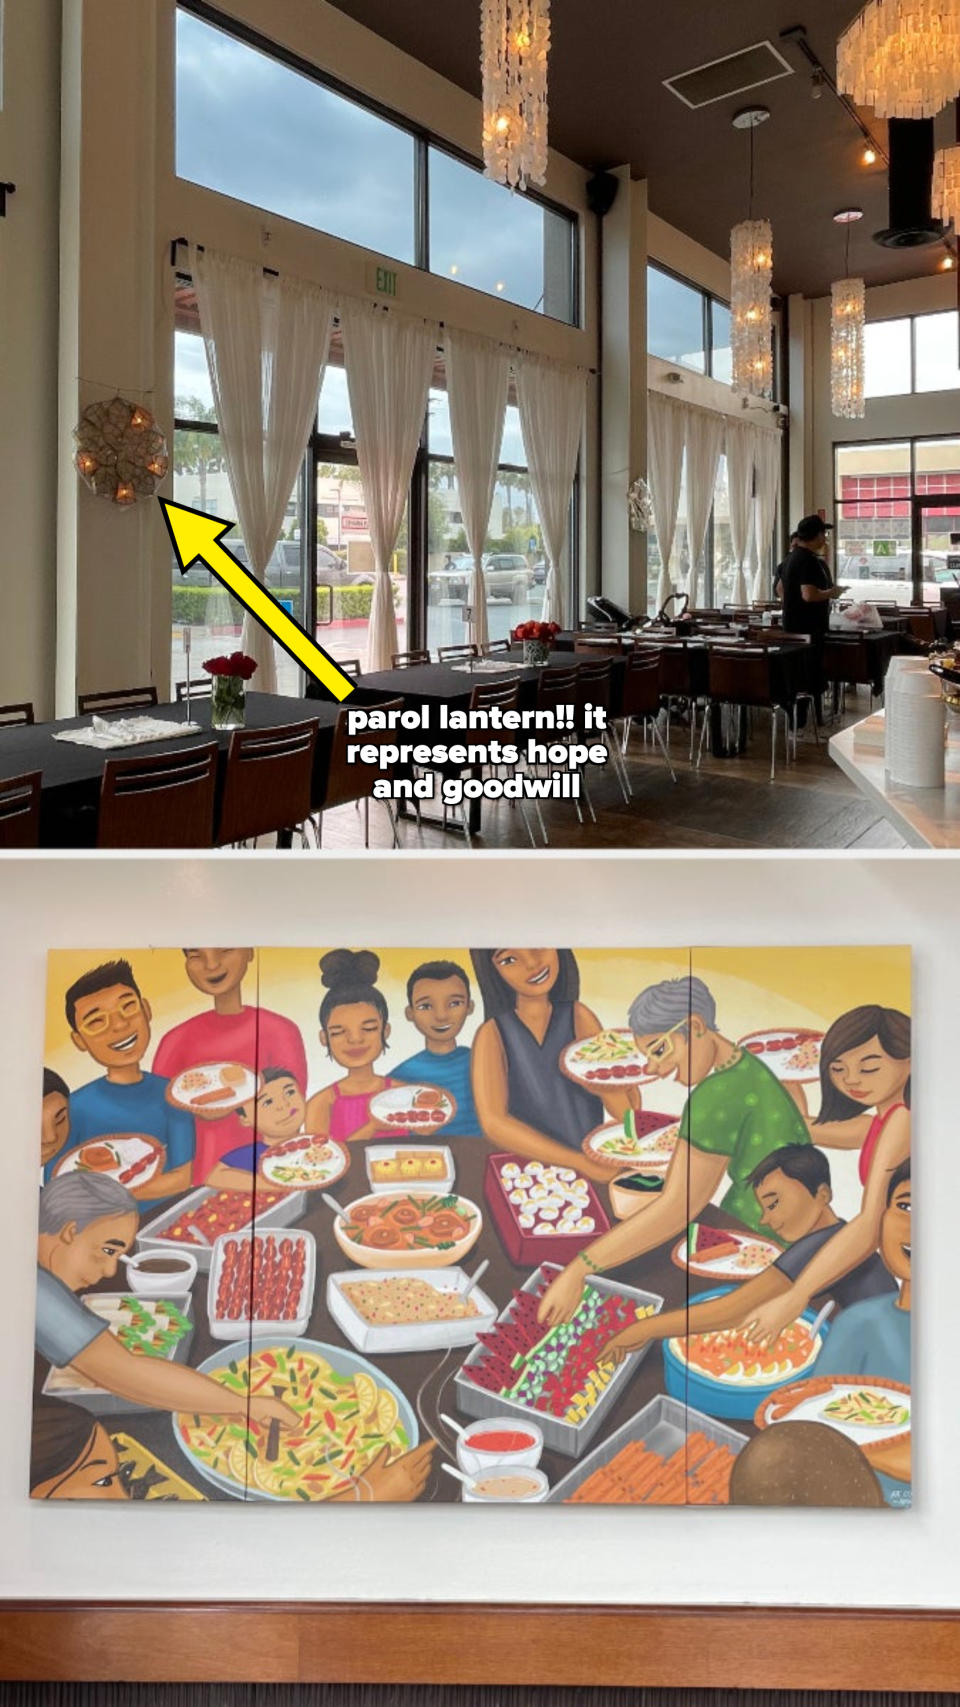 A restaurant with elegant light fixtures and large windows. Below, a mural depicts a diverse group of people enjoying a meal together with various dishes